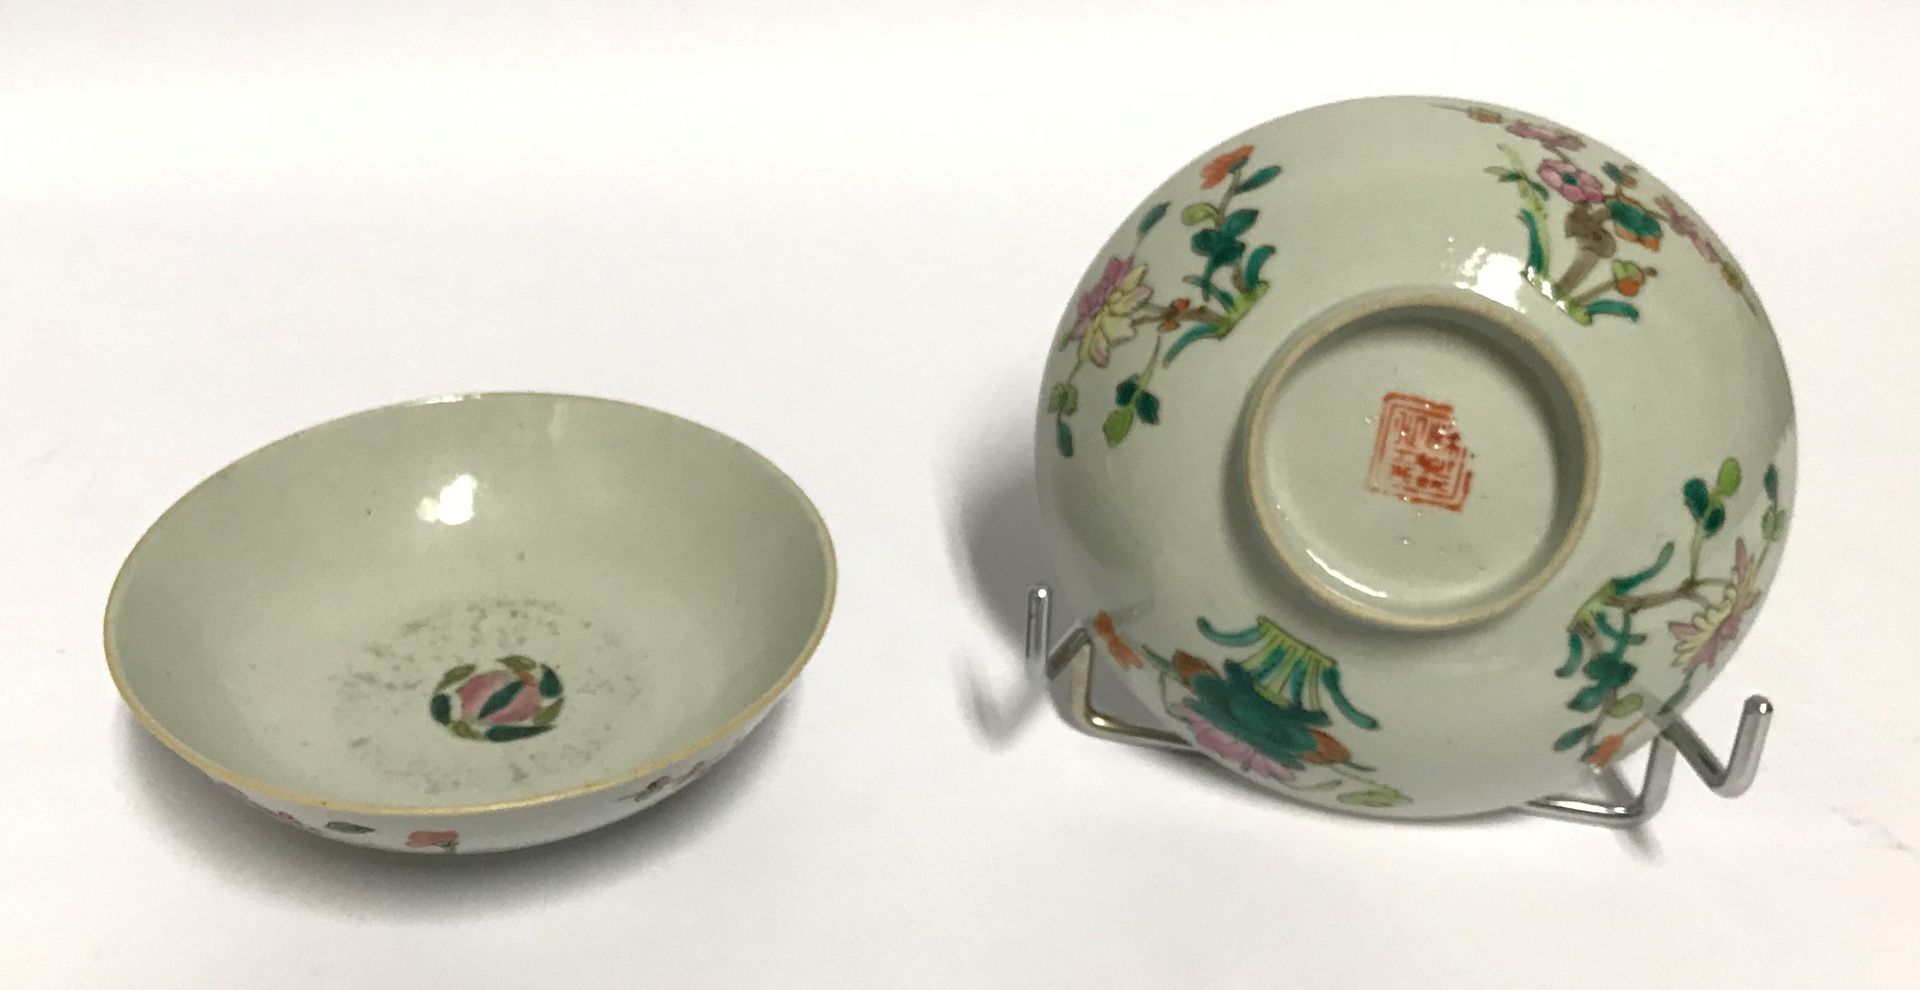 Null CHINA, 19th century

Set of two porcelain bowls enamelled in polychrome wit&hellip;